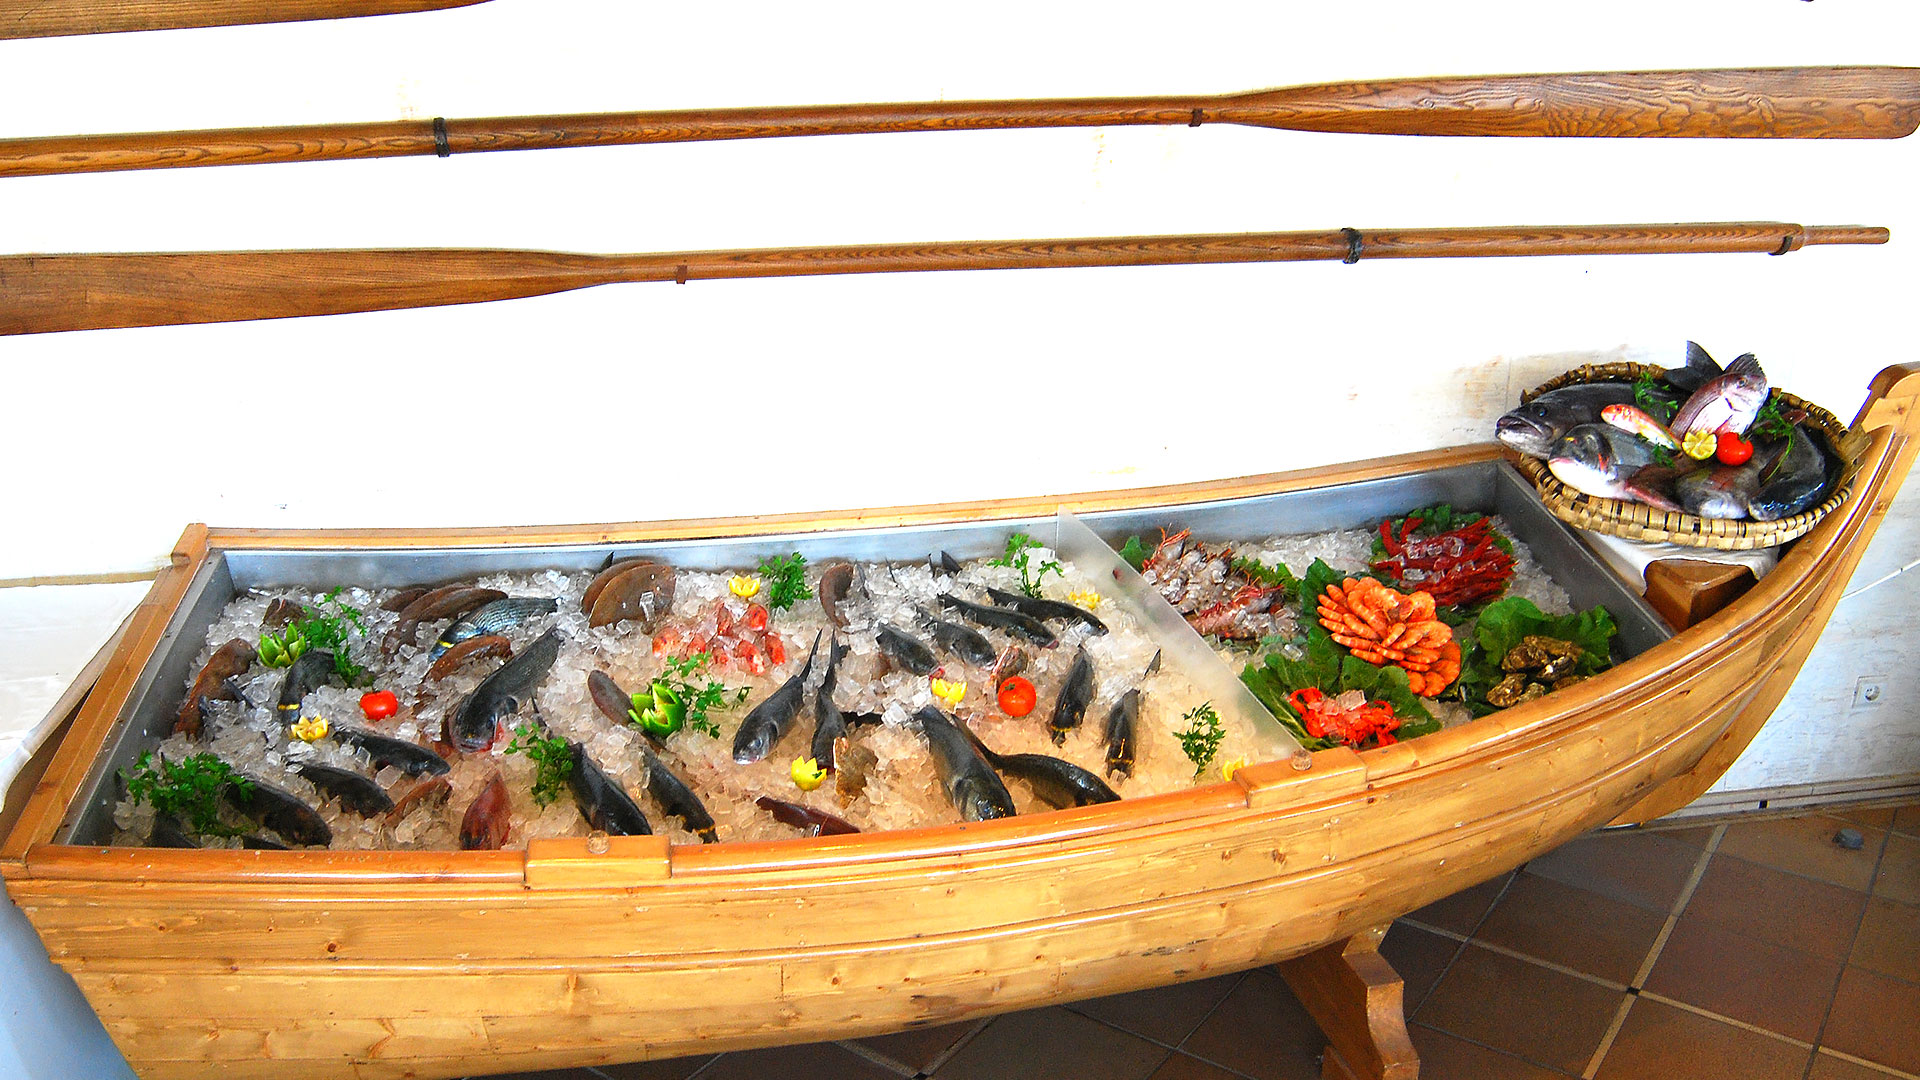 The world-famous fish and seafood in the refrigerator boat